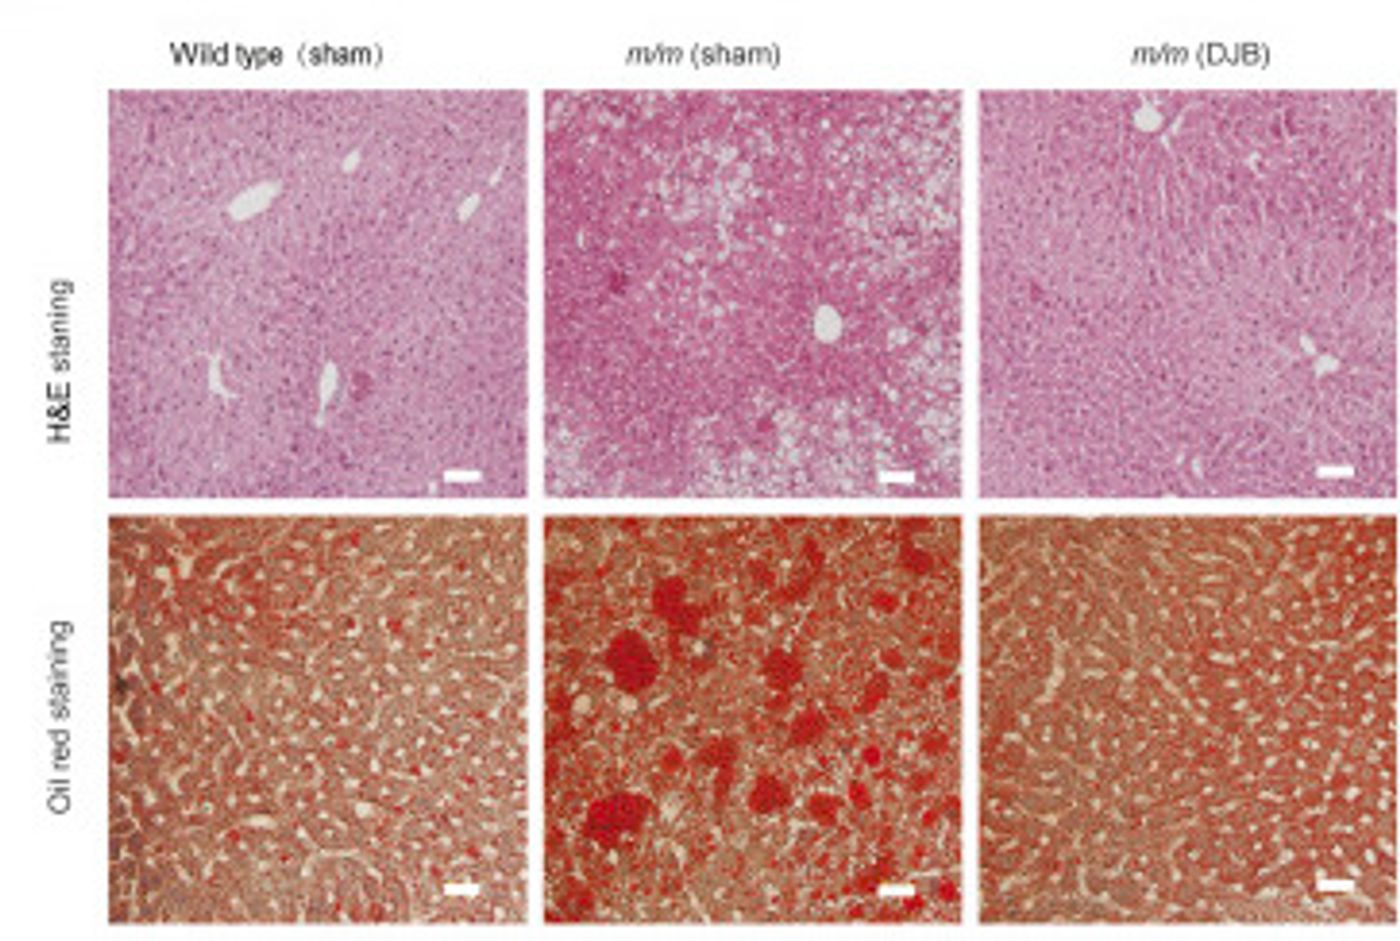 Lipid accumulation is reversed in livers of DJB male T2DM mice. - Representative H&E and oil red O staining of livers of T2DM mice 9 weeks after DJB surgery / Credit: American Journal of Pathology Jiang et al